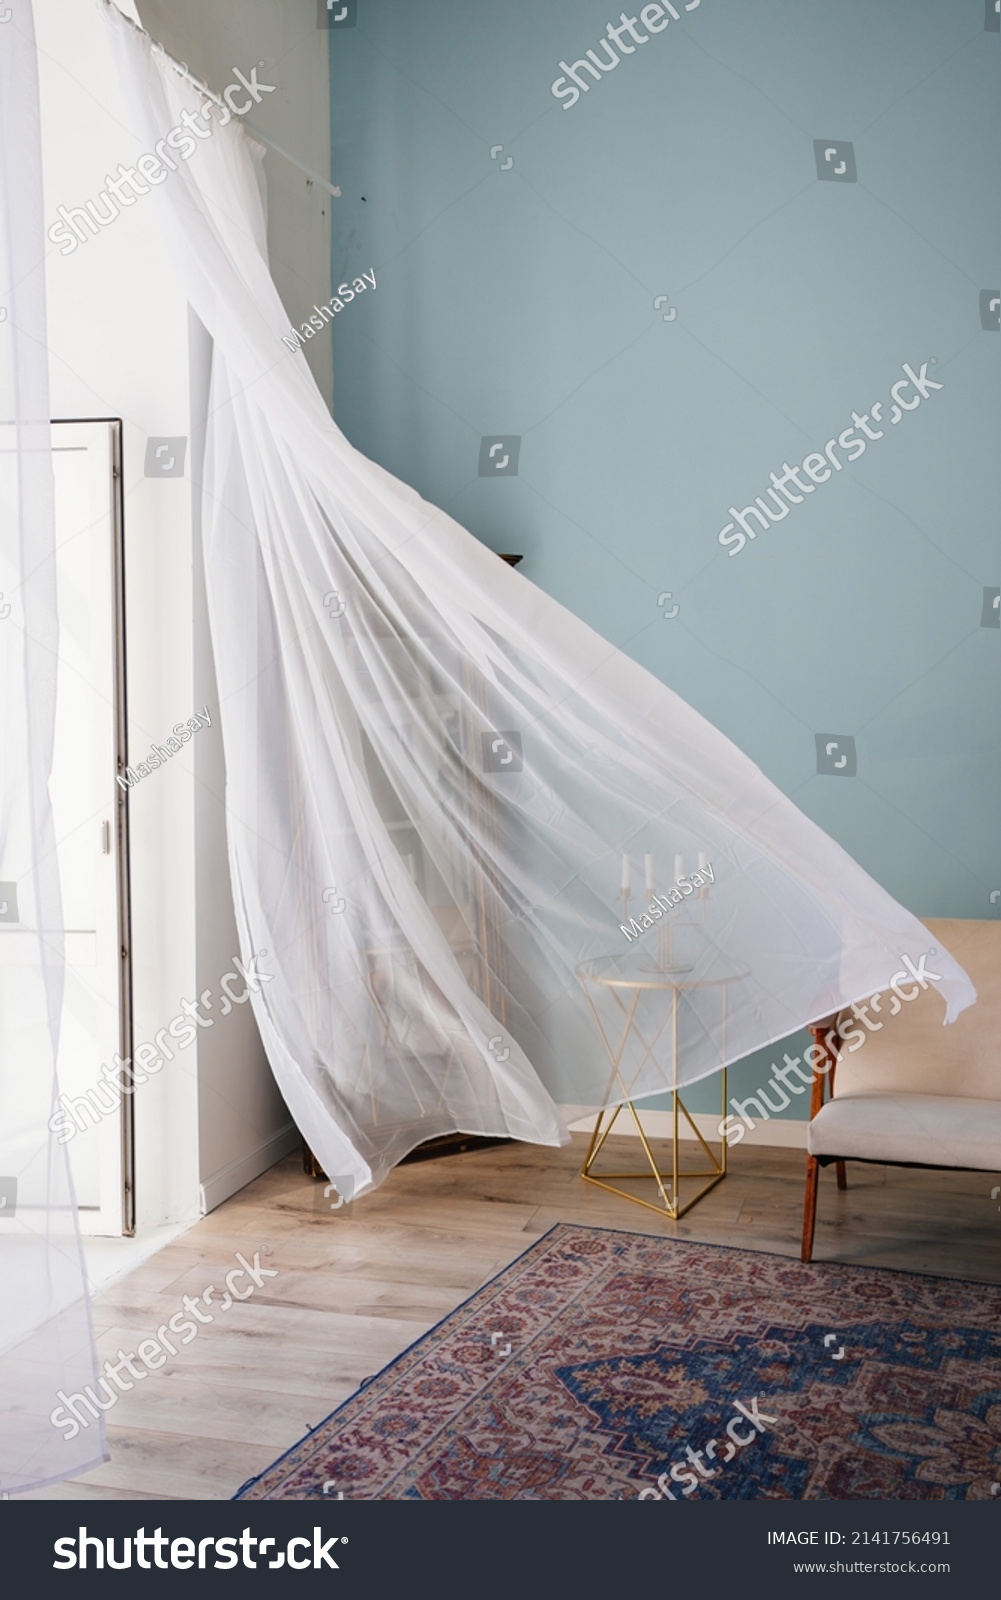 transparent fluttering curtain in the room with a candlestick on the table. romantic mood and spring weather. ventilation of premises. fresh wind. #2141756491